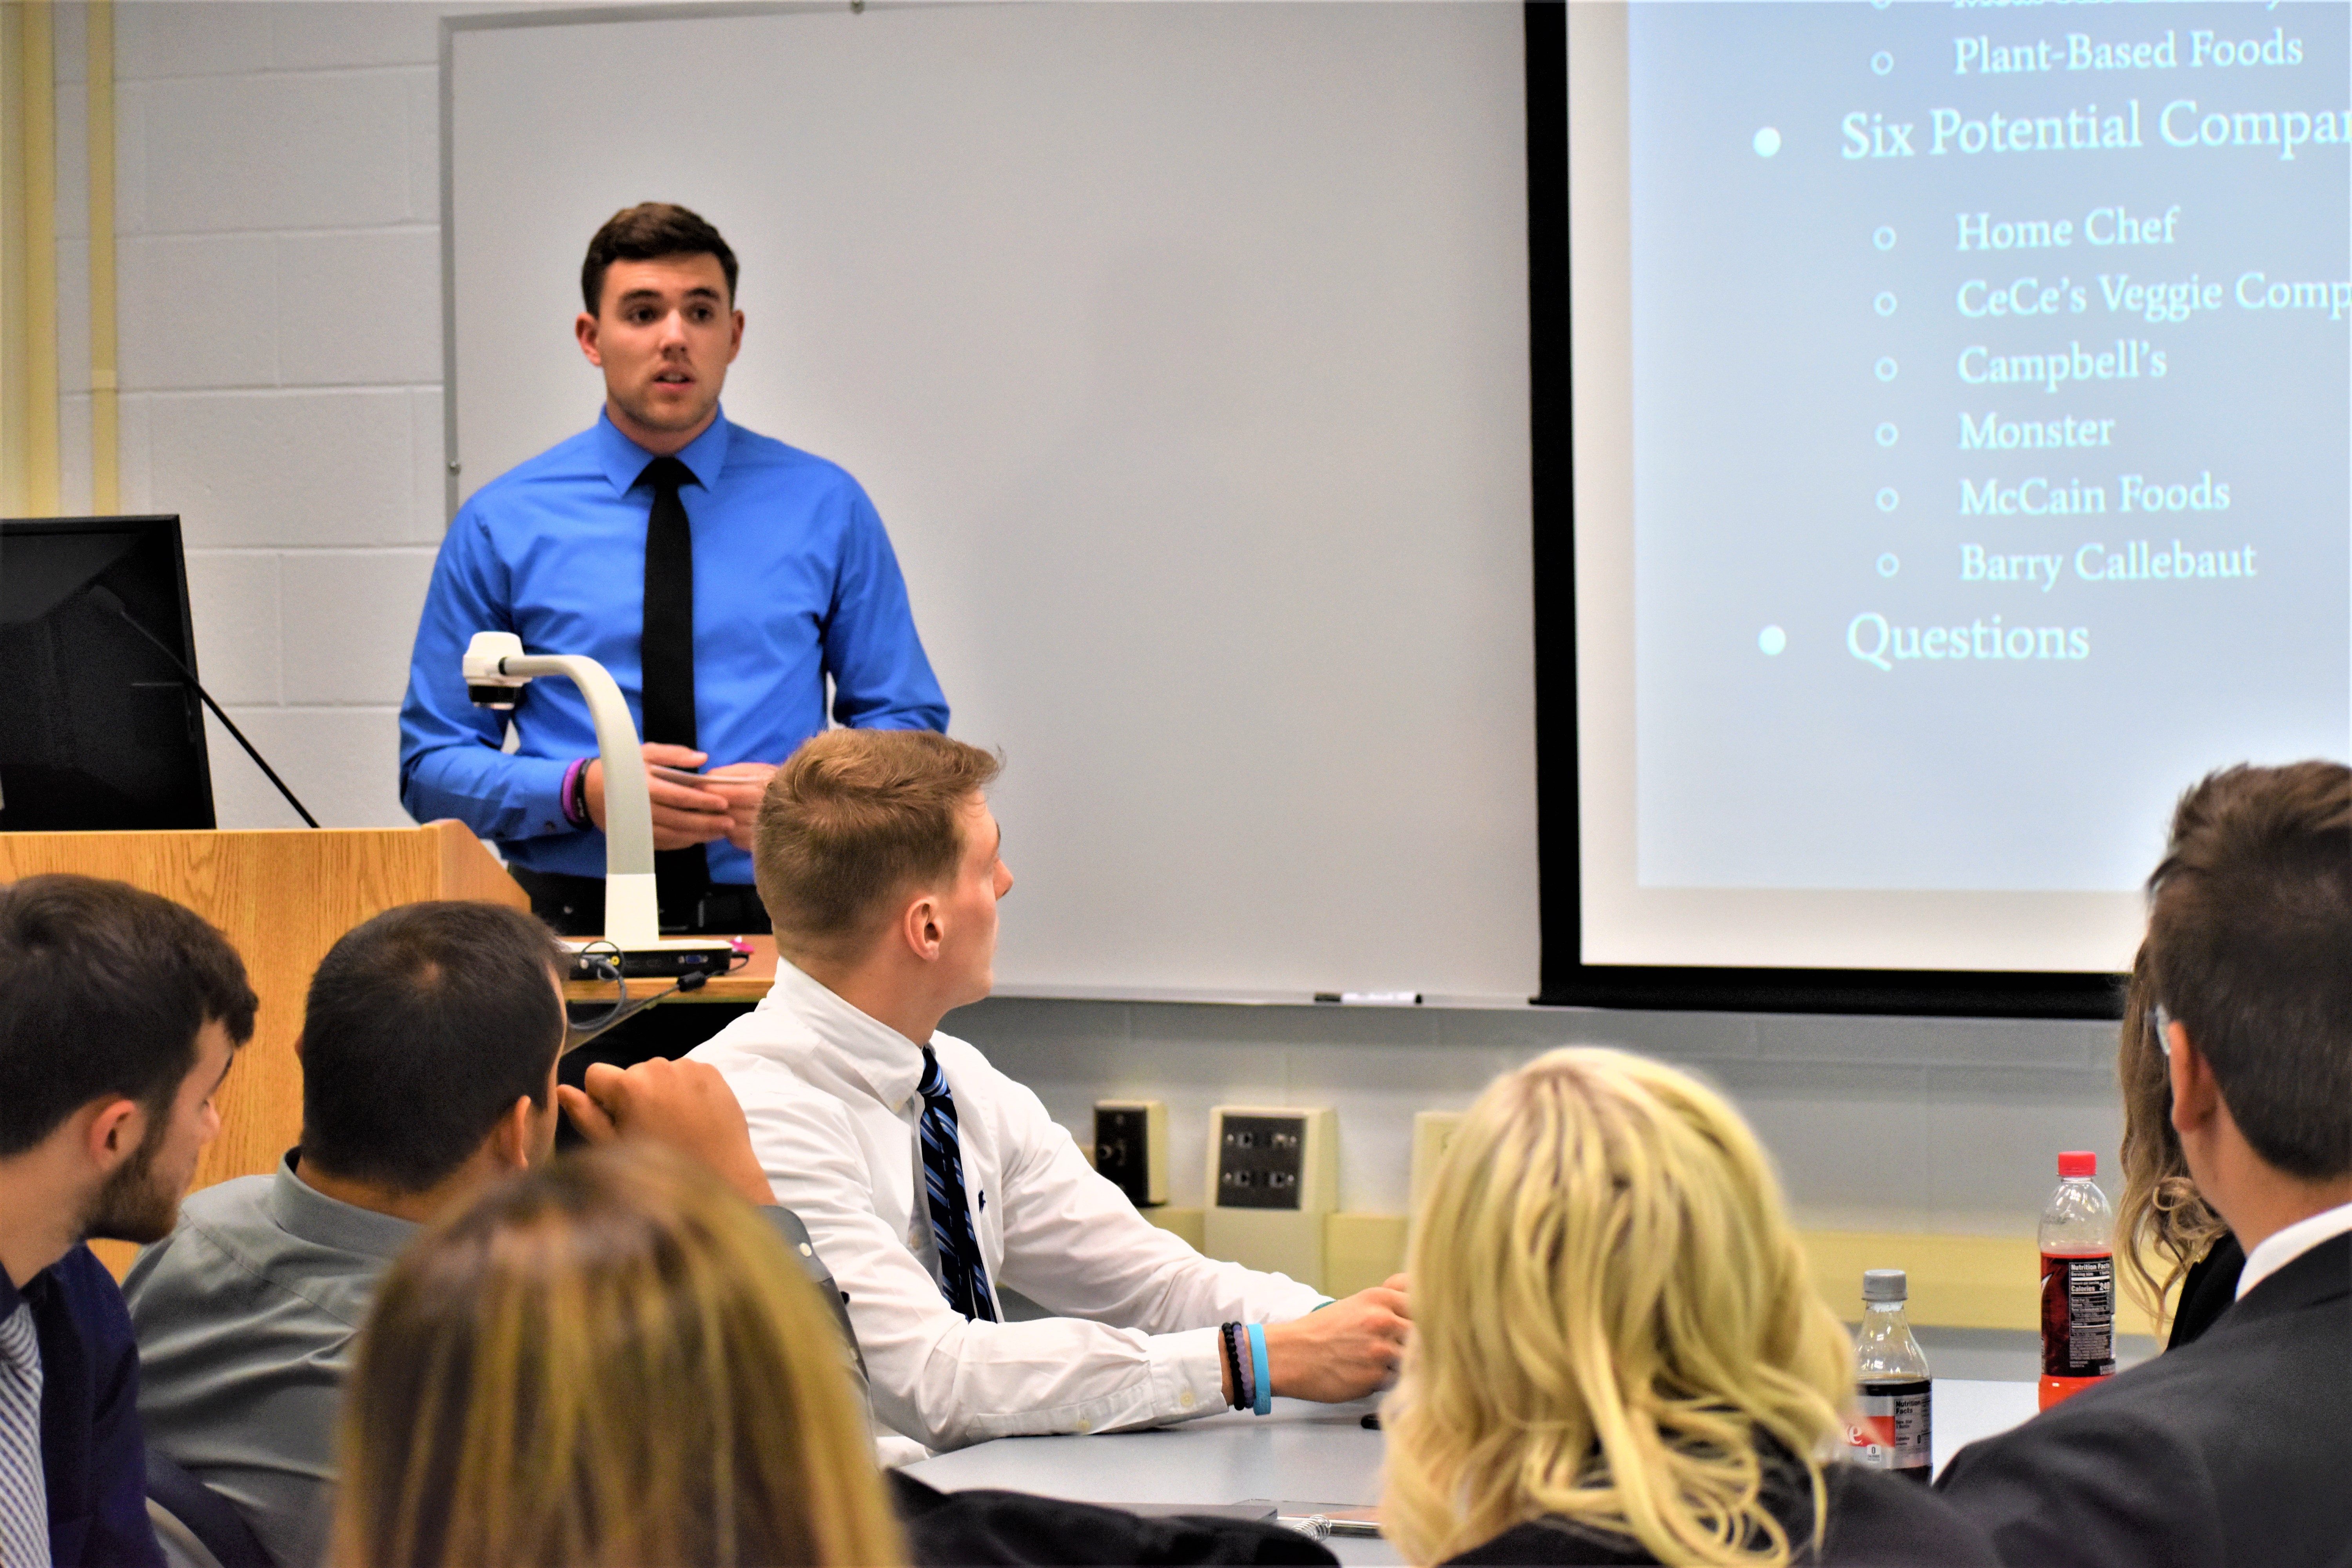 Noah Rankin, at the podium, was among the business students who presented potential ways to spur economic growth to representatives from Clearly Ahead Development. (Provided photo)